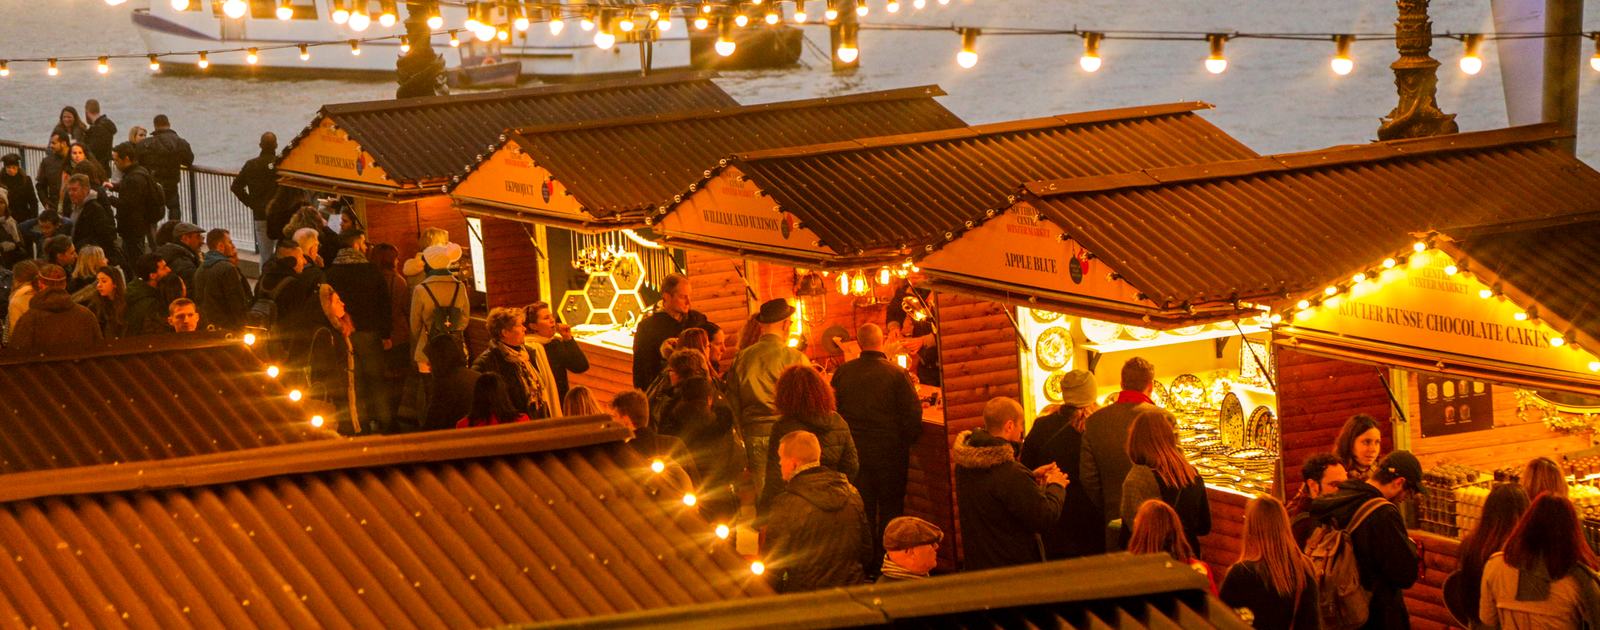 5 best Christmas markets in the UK